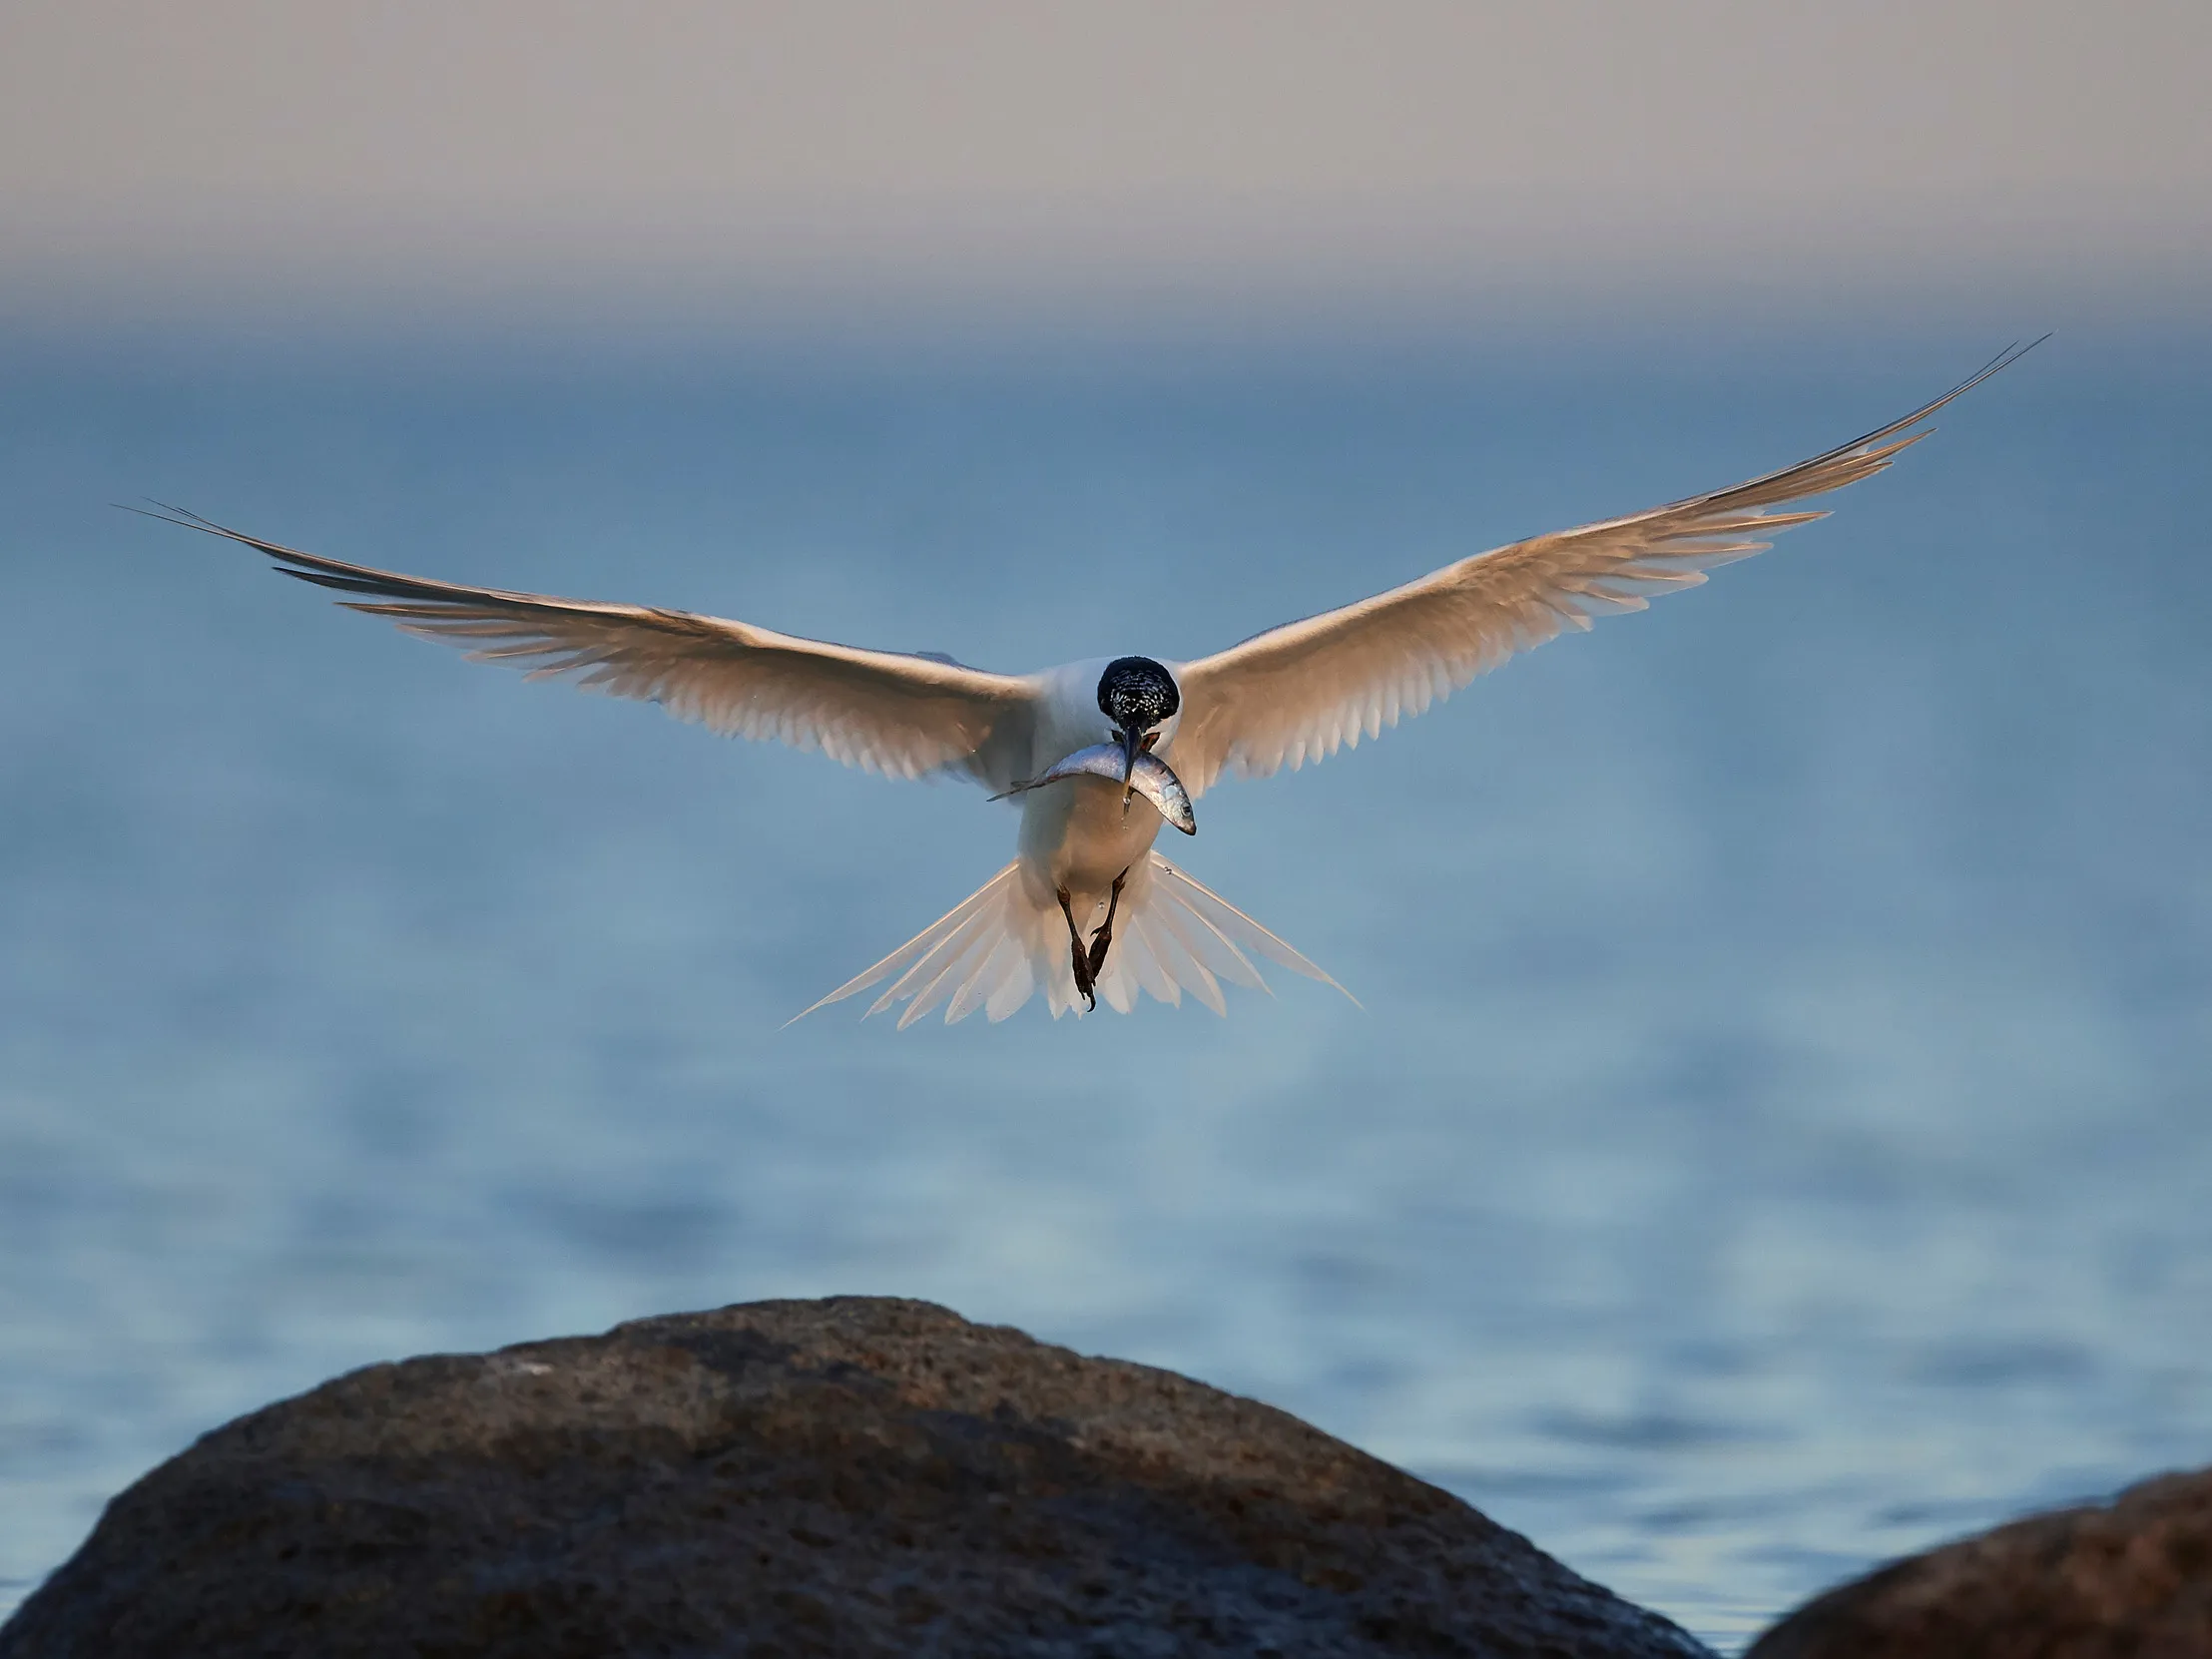 Sandwich Tern with summer plumage, in low flight over the coast, with a small fish in its beak